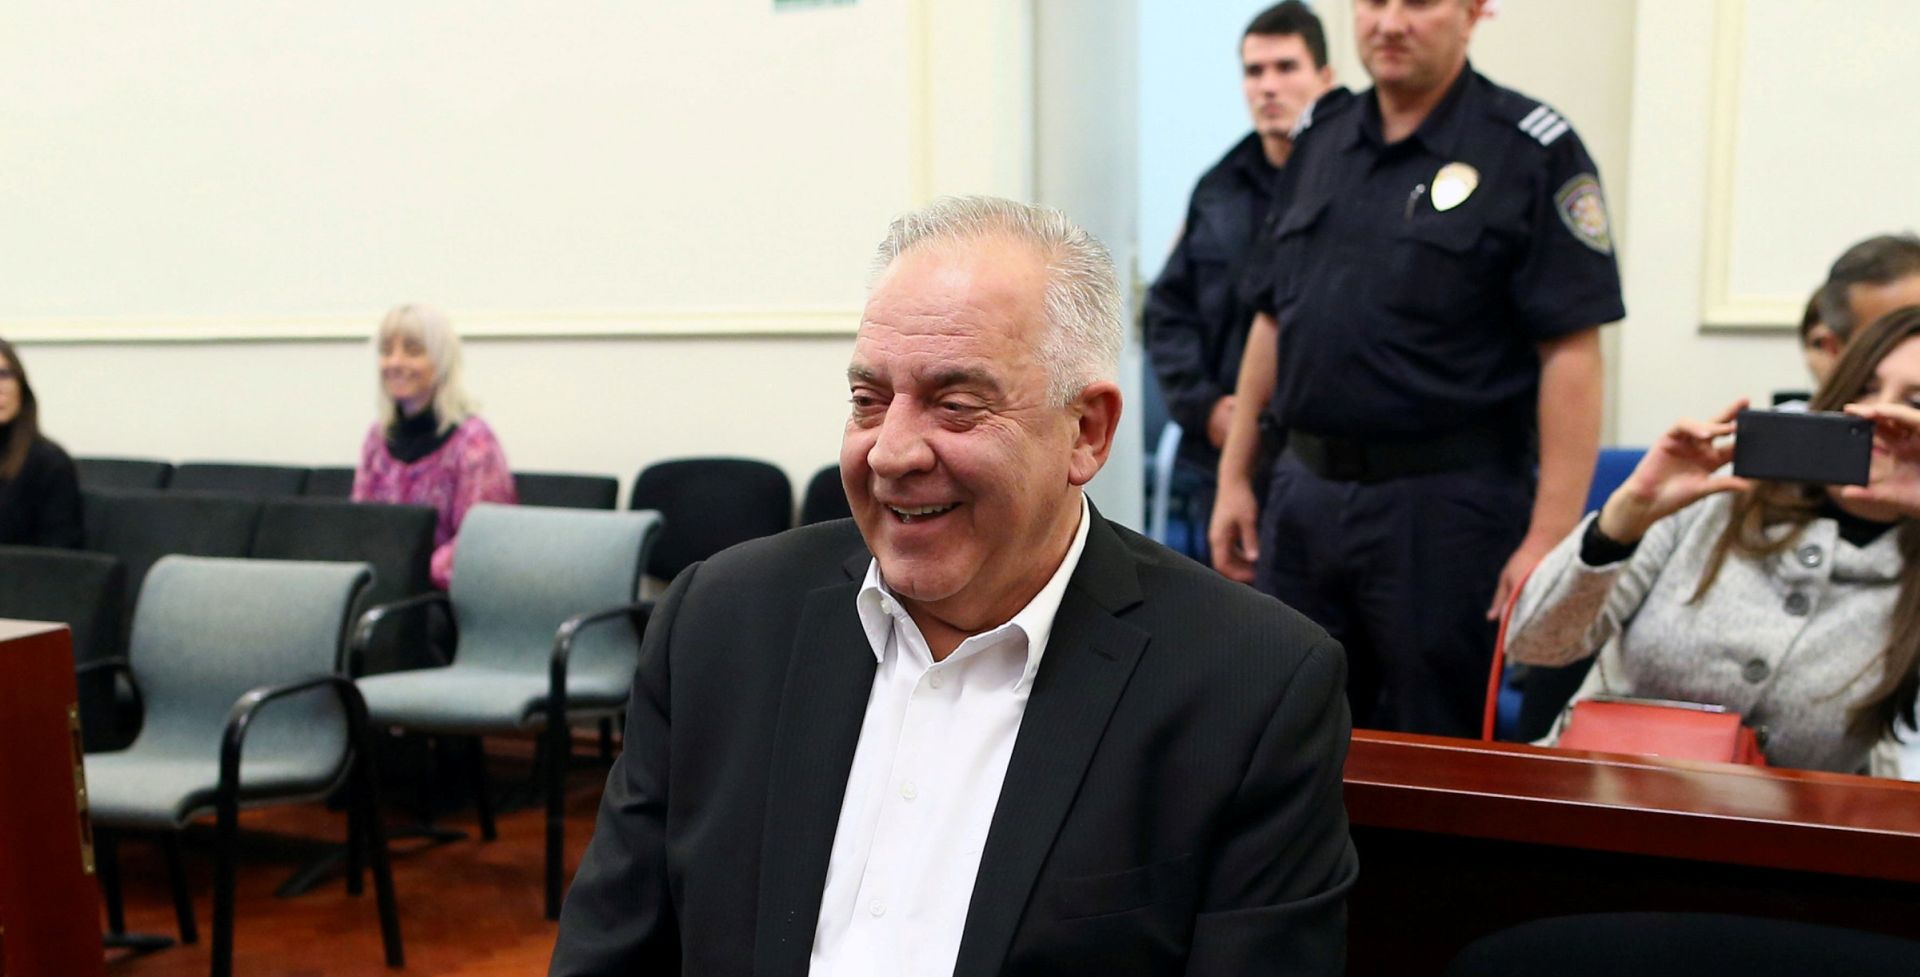 FILE PHOTO: Former Croatian Prime Minister Ivo Sanader is seen at a court during an announcement of a verdict in Zagreb FILE PHOTO: Former Croatian Prime Minister Ivo Sanader is seen at a court during an announcement of a verdict in Zagreb, Croatia October 22, 2018. REUTERS/Antonio Bronic/File Photo Antonio Bronic